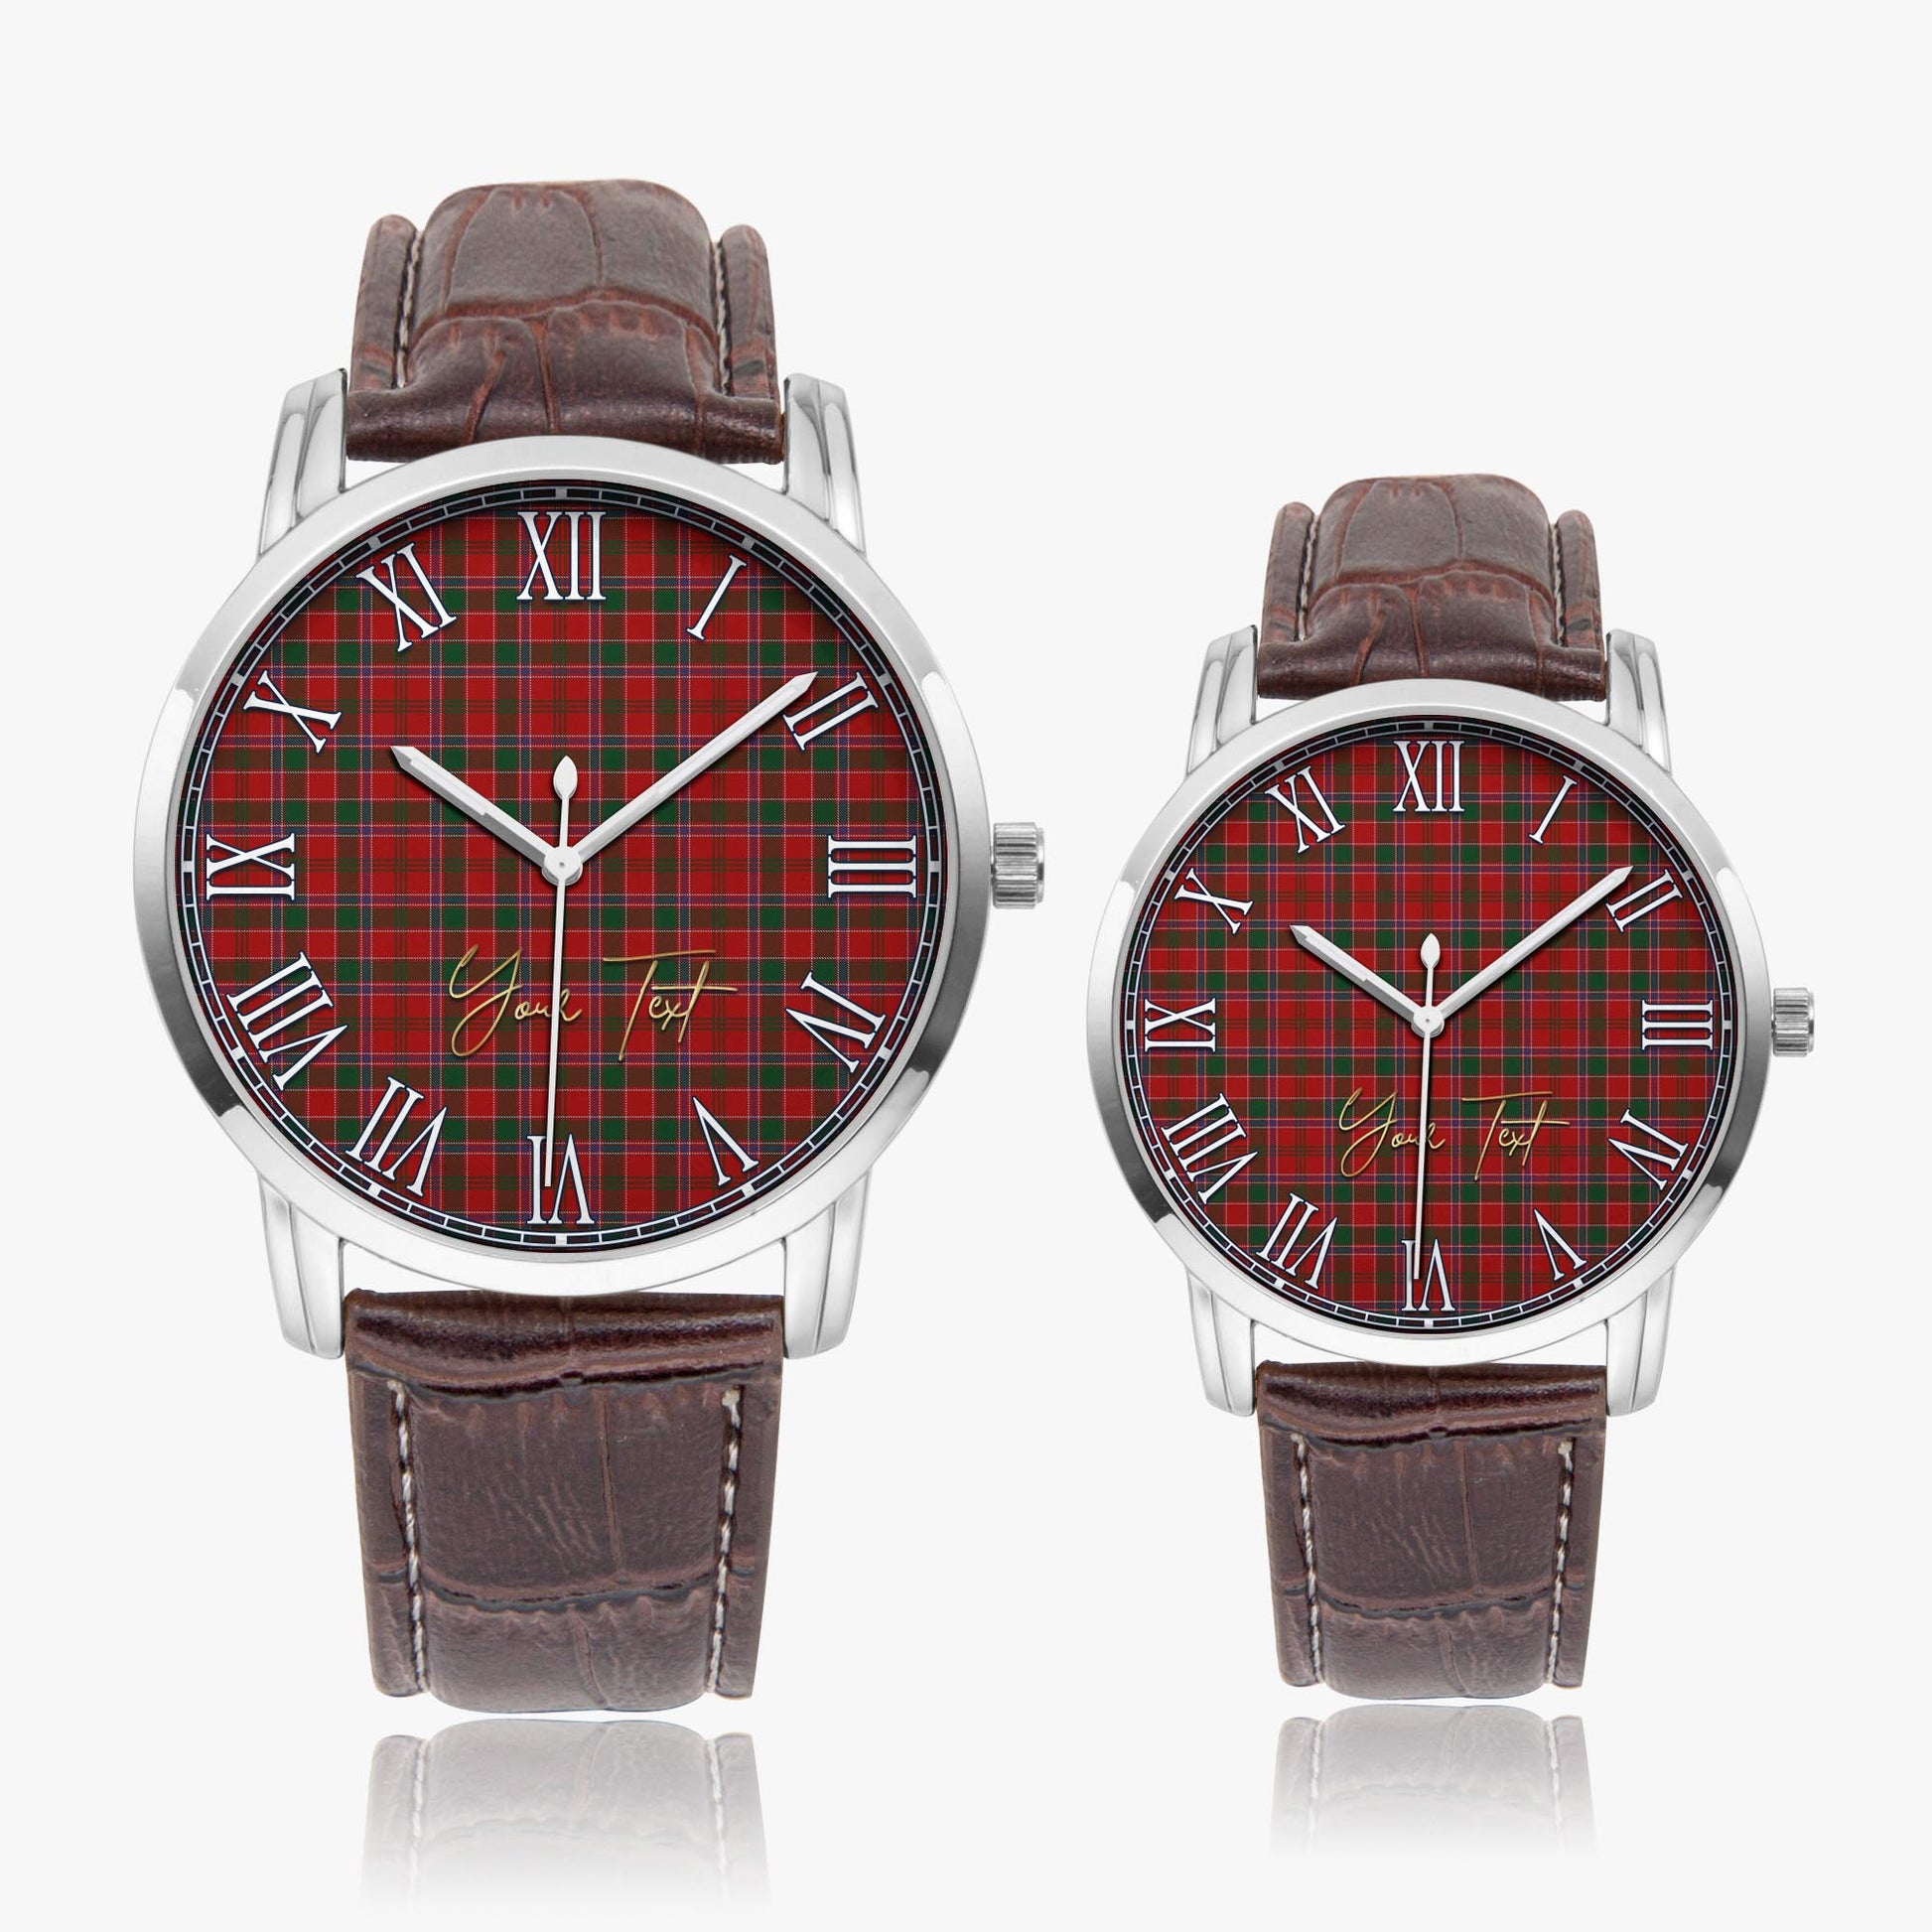 Dalzell (Dalziel) Tartan Personalized Your Text Leather Trap Quartz Watch Wide Type Silver Case With Brown Leather Strap - Tartanvibesclothing